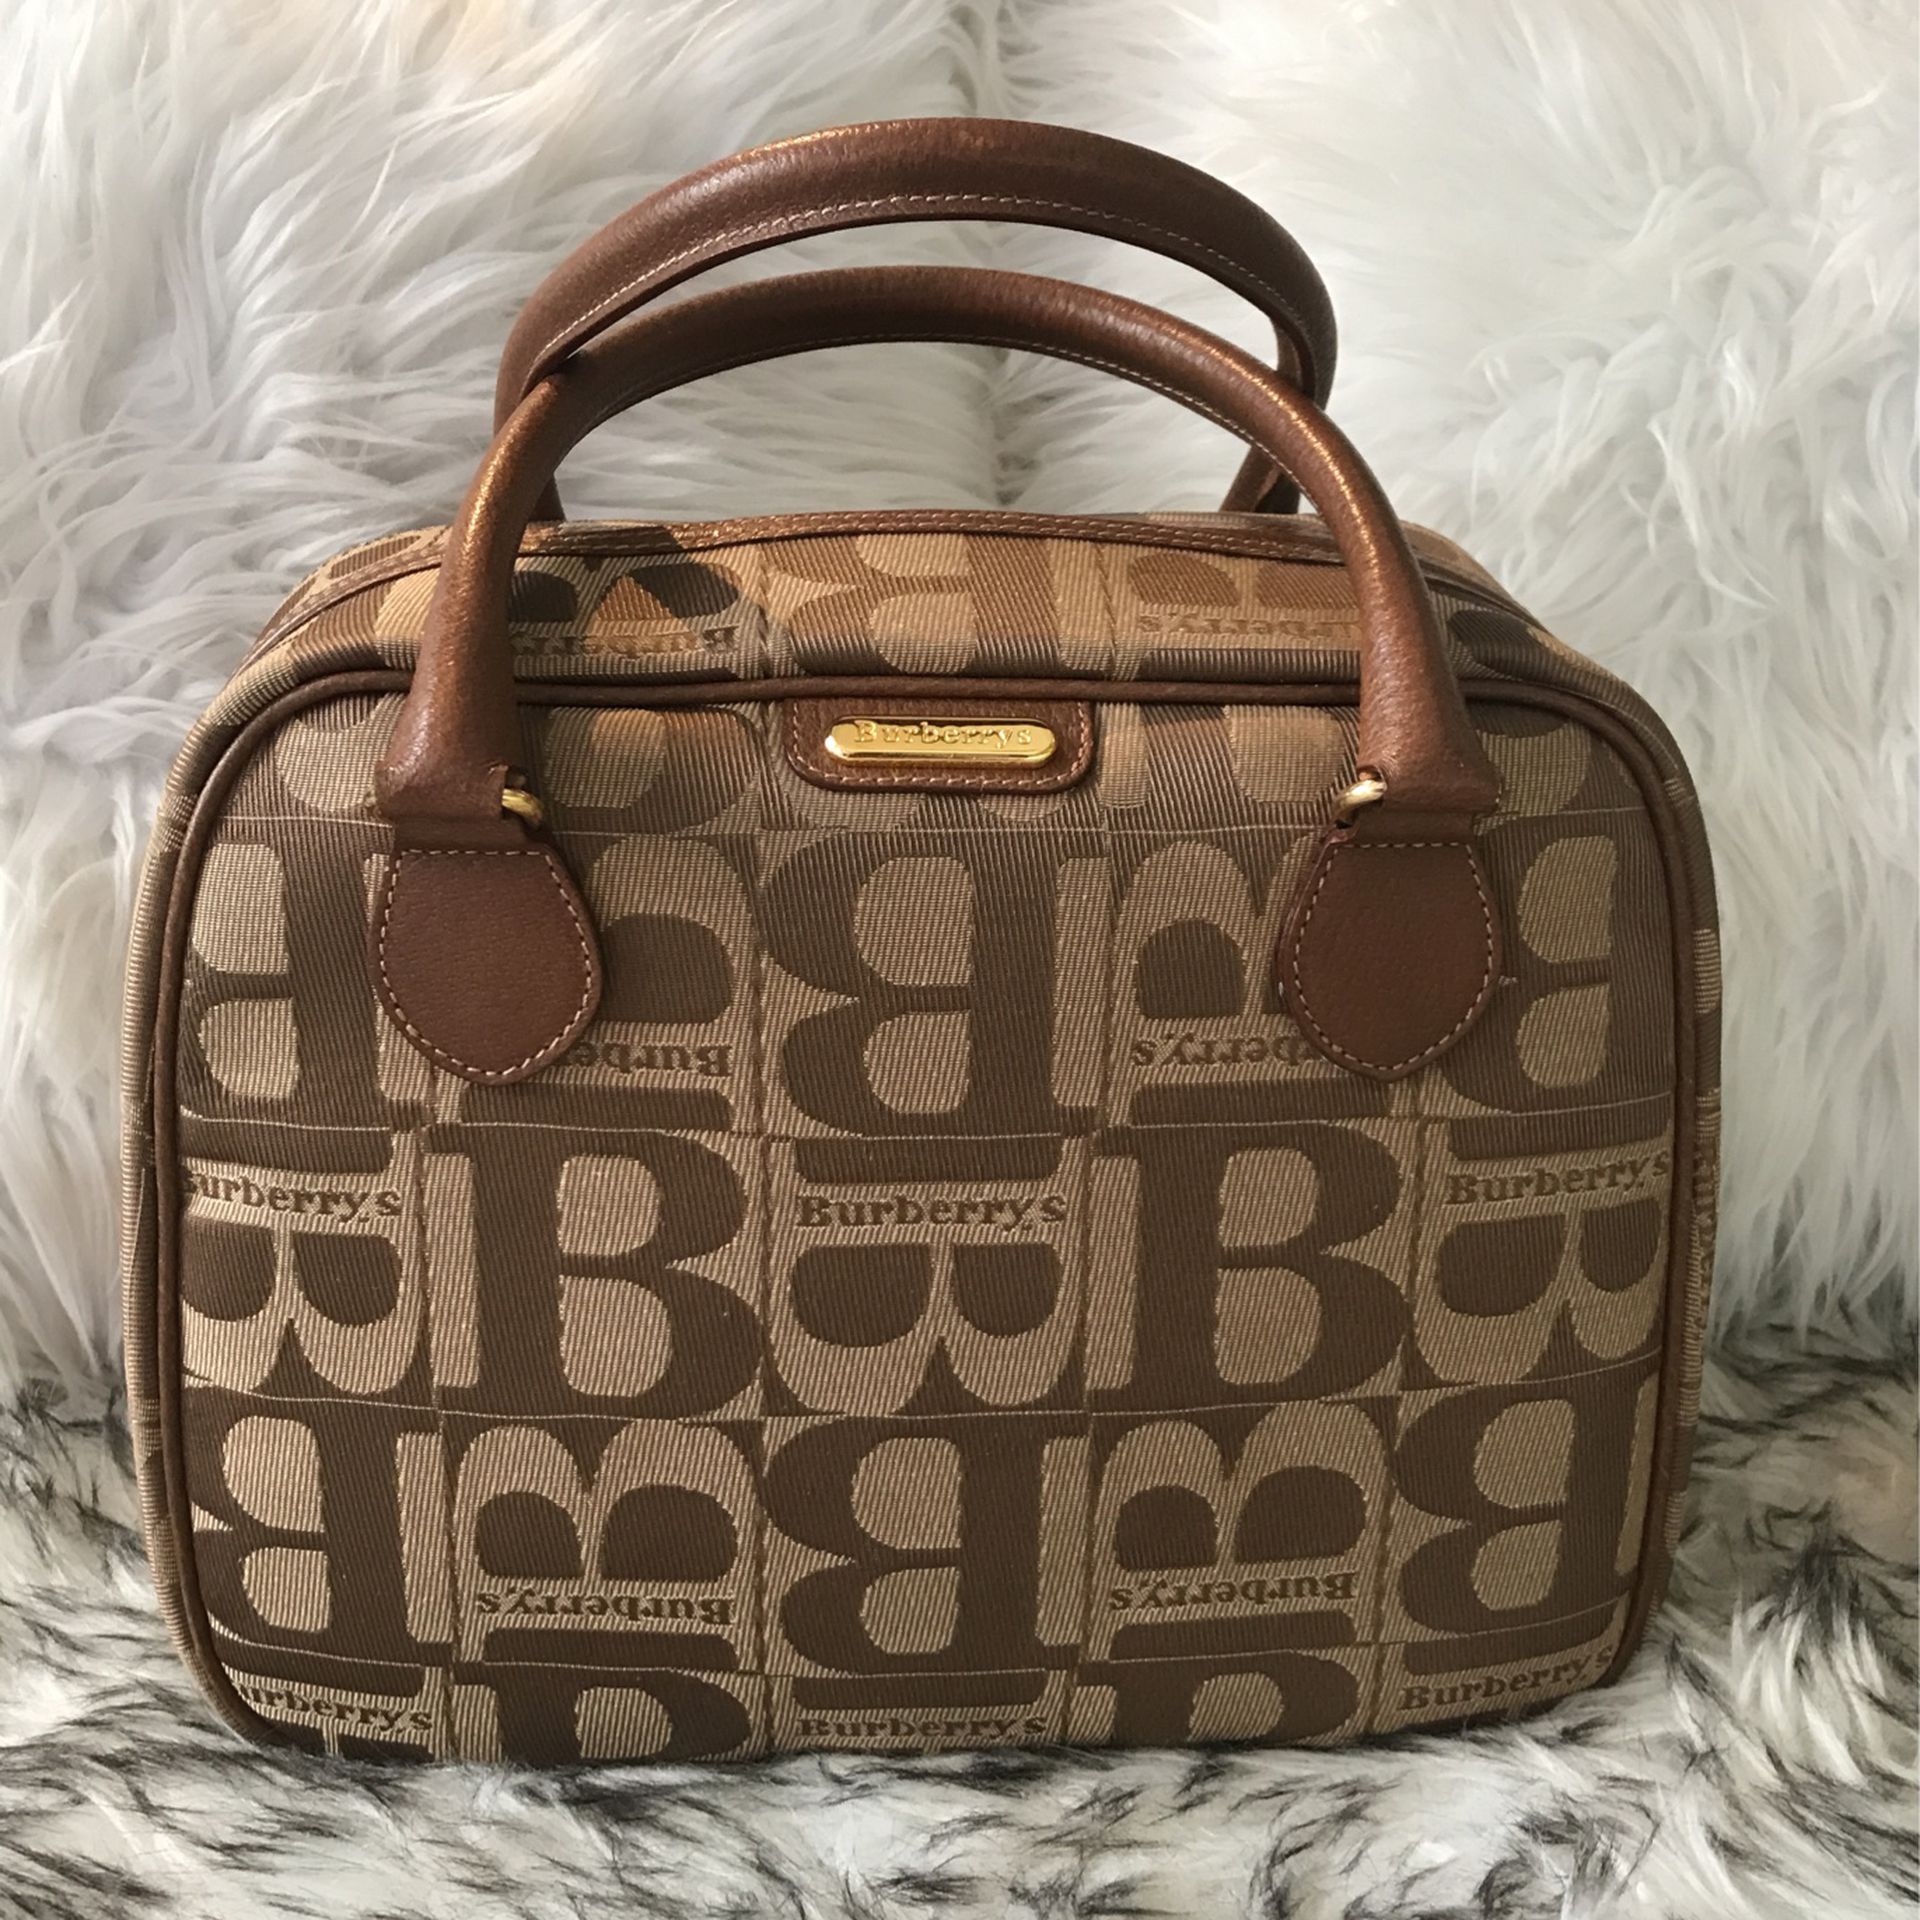 Burberry Bag for Sale in Rosemead, CA - OfferUp